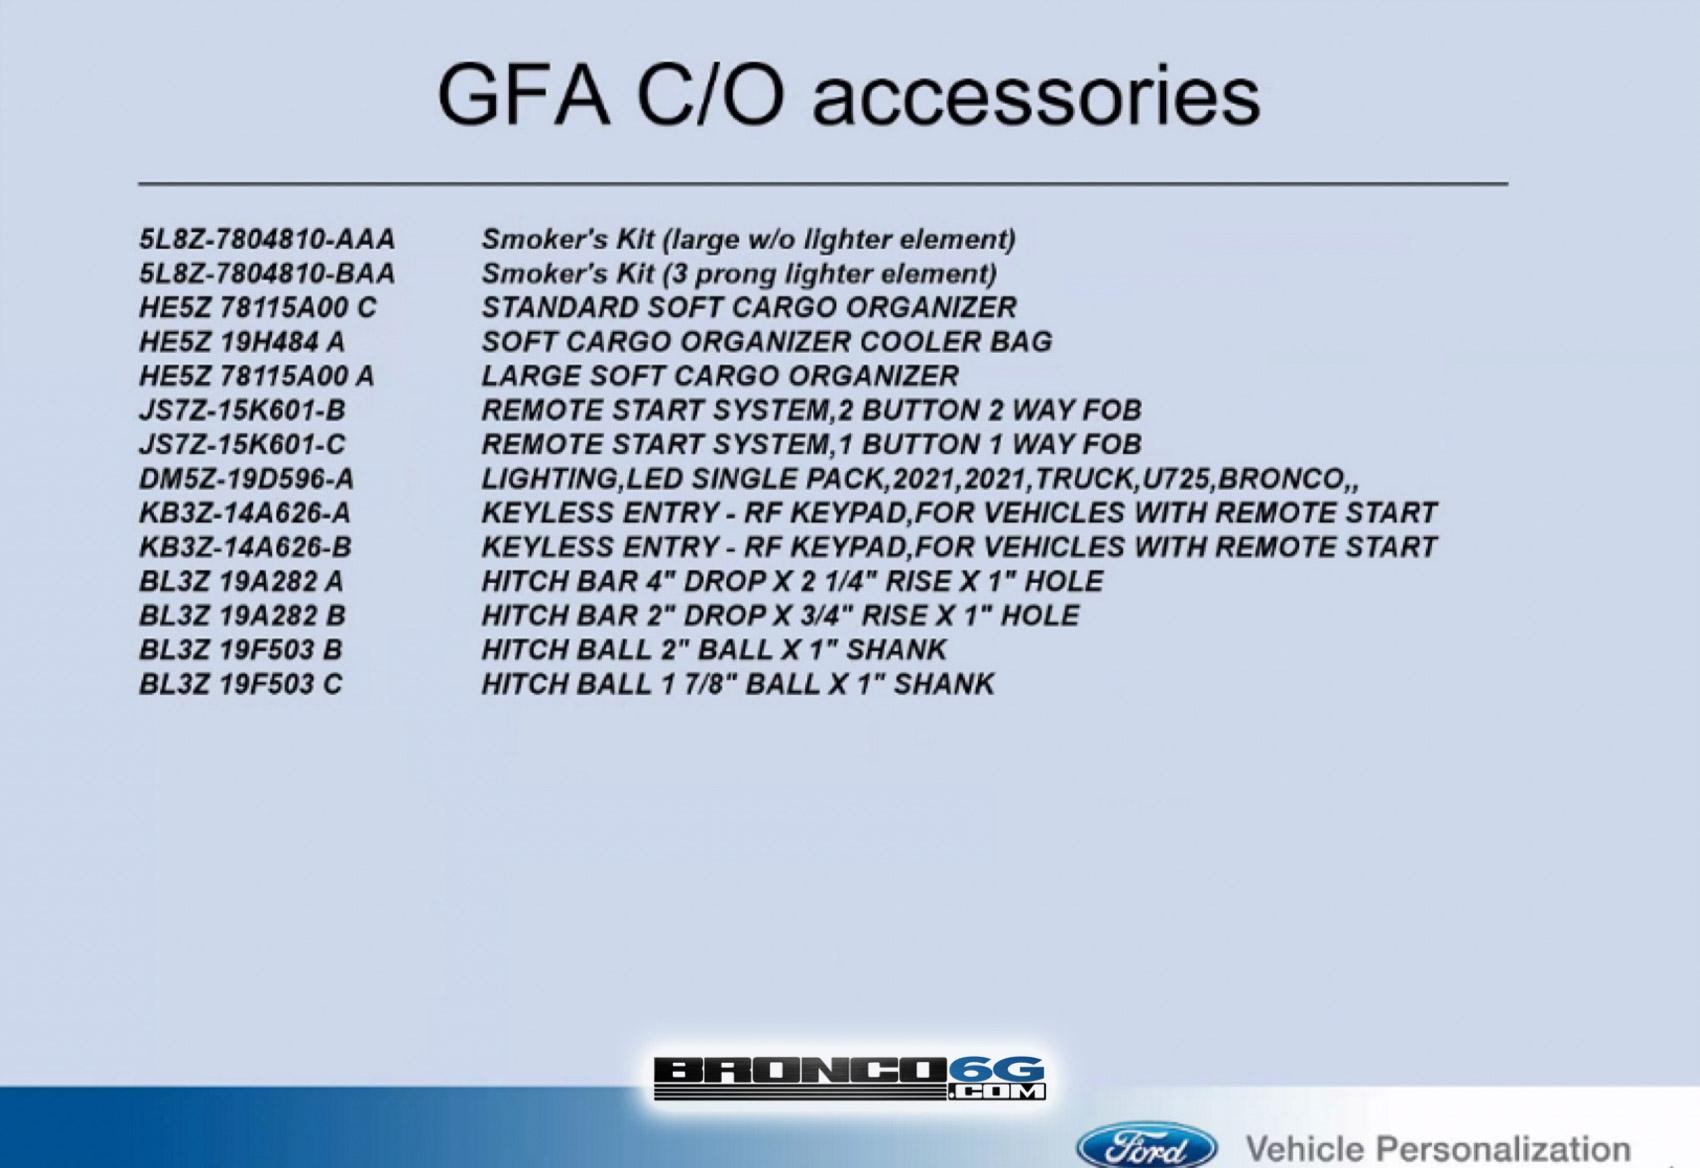 Ford Bronco ⚙️ 2021 BRONCO ACCESSORIES PICTURES! Ford Performance Parts Catalog + Availability Schedule ? ovce3zt7j94wc8cho1f8mls9bix6d52xri6w18vi&rid=giphy